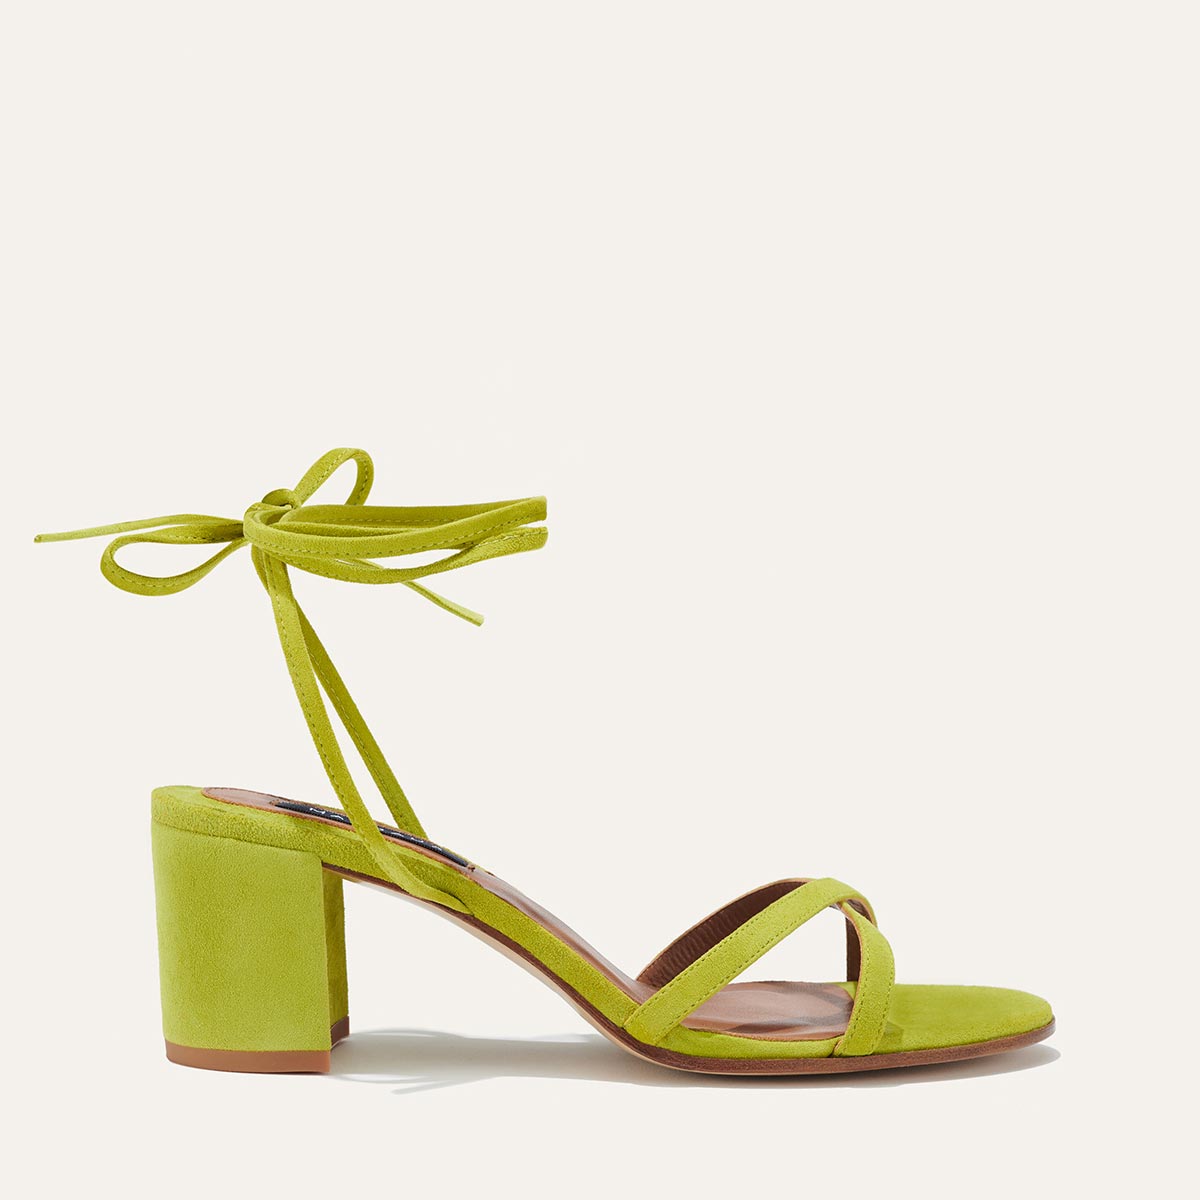 The Soho Sandal - Chartreuse Suede